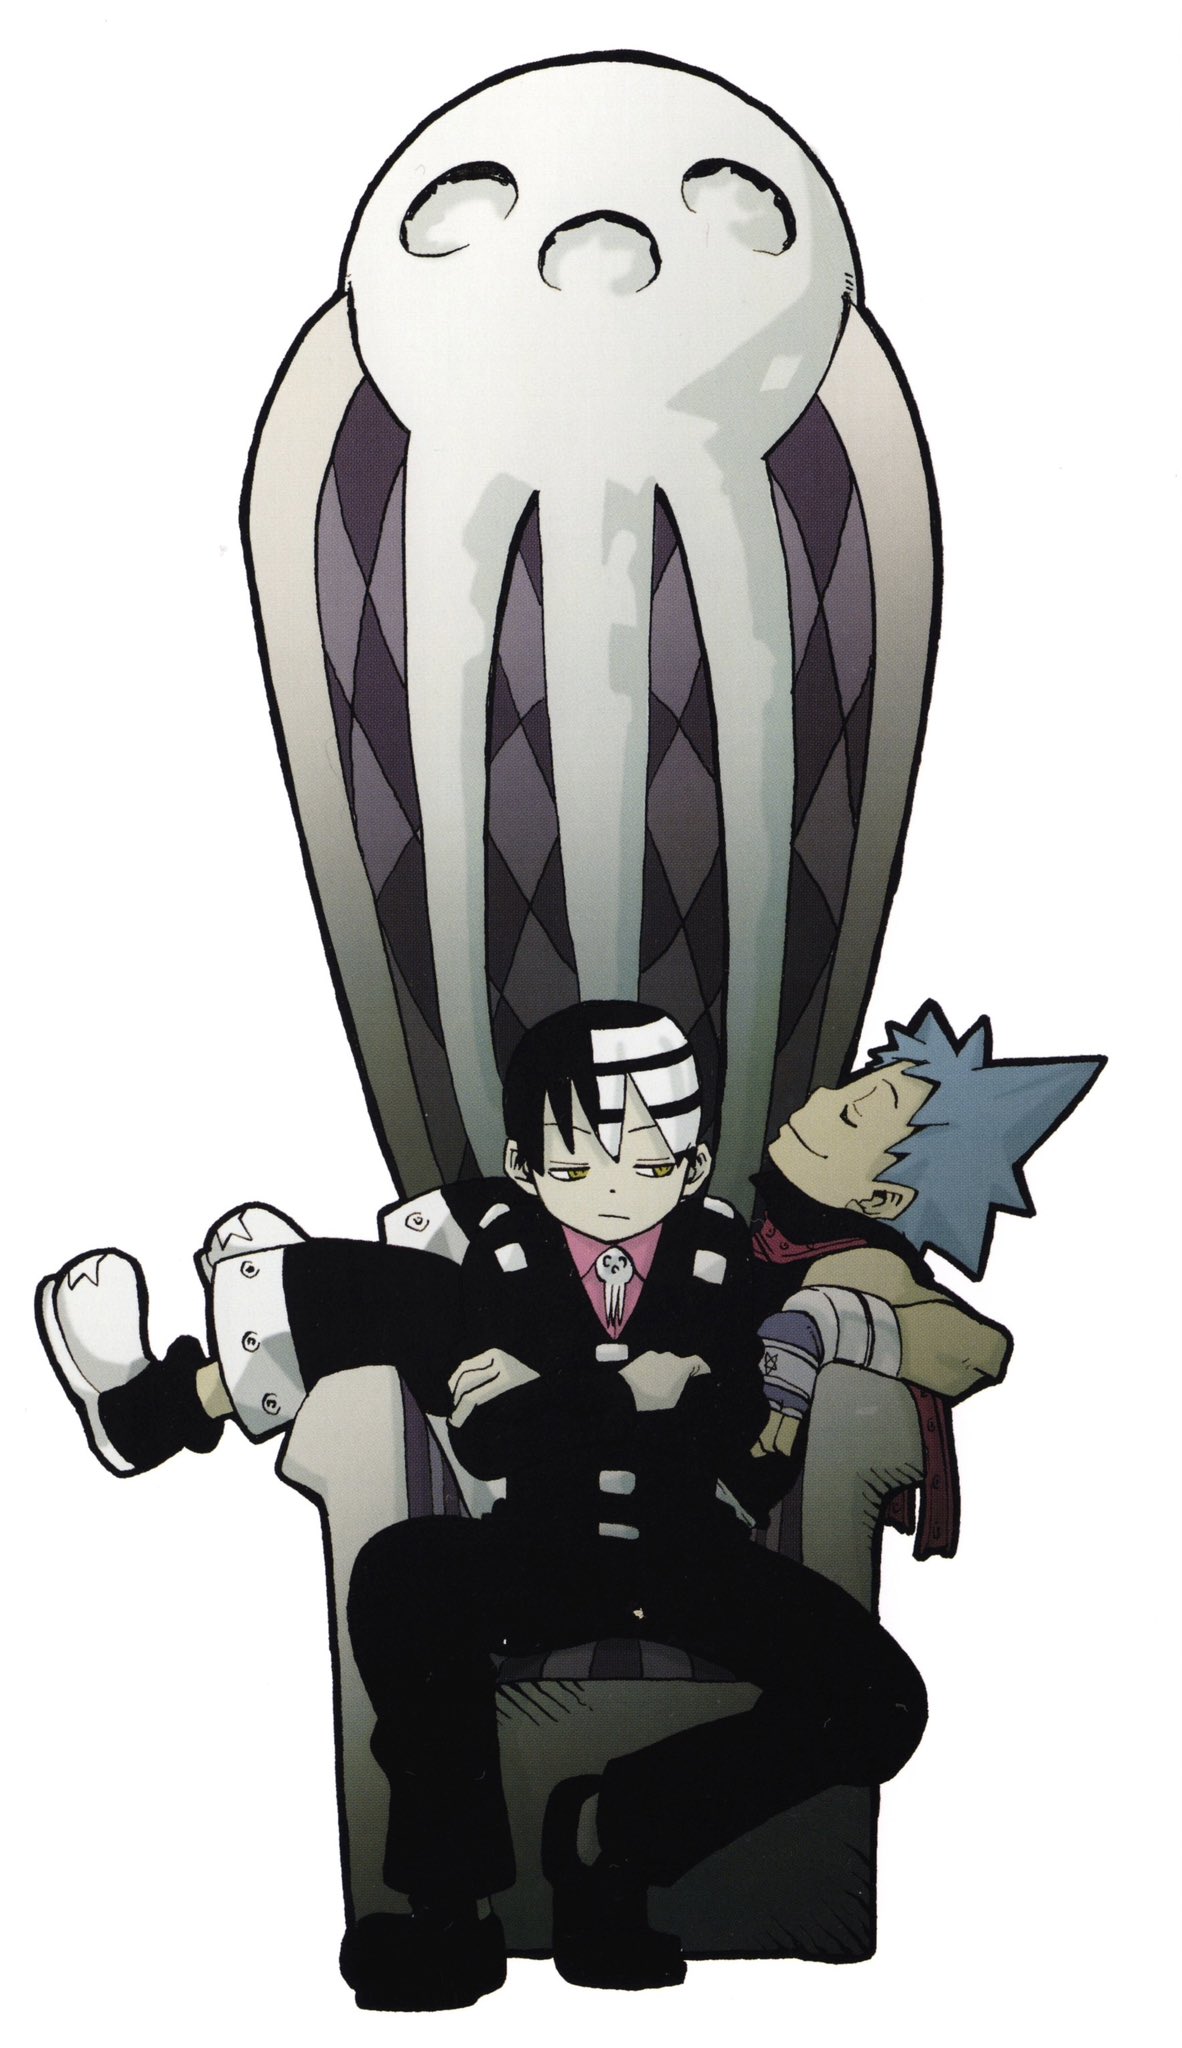 We need Soul Eater Reboot!  #anime #animefyp #souleater